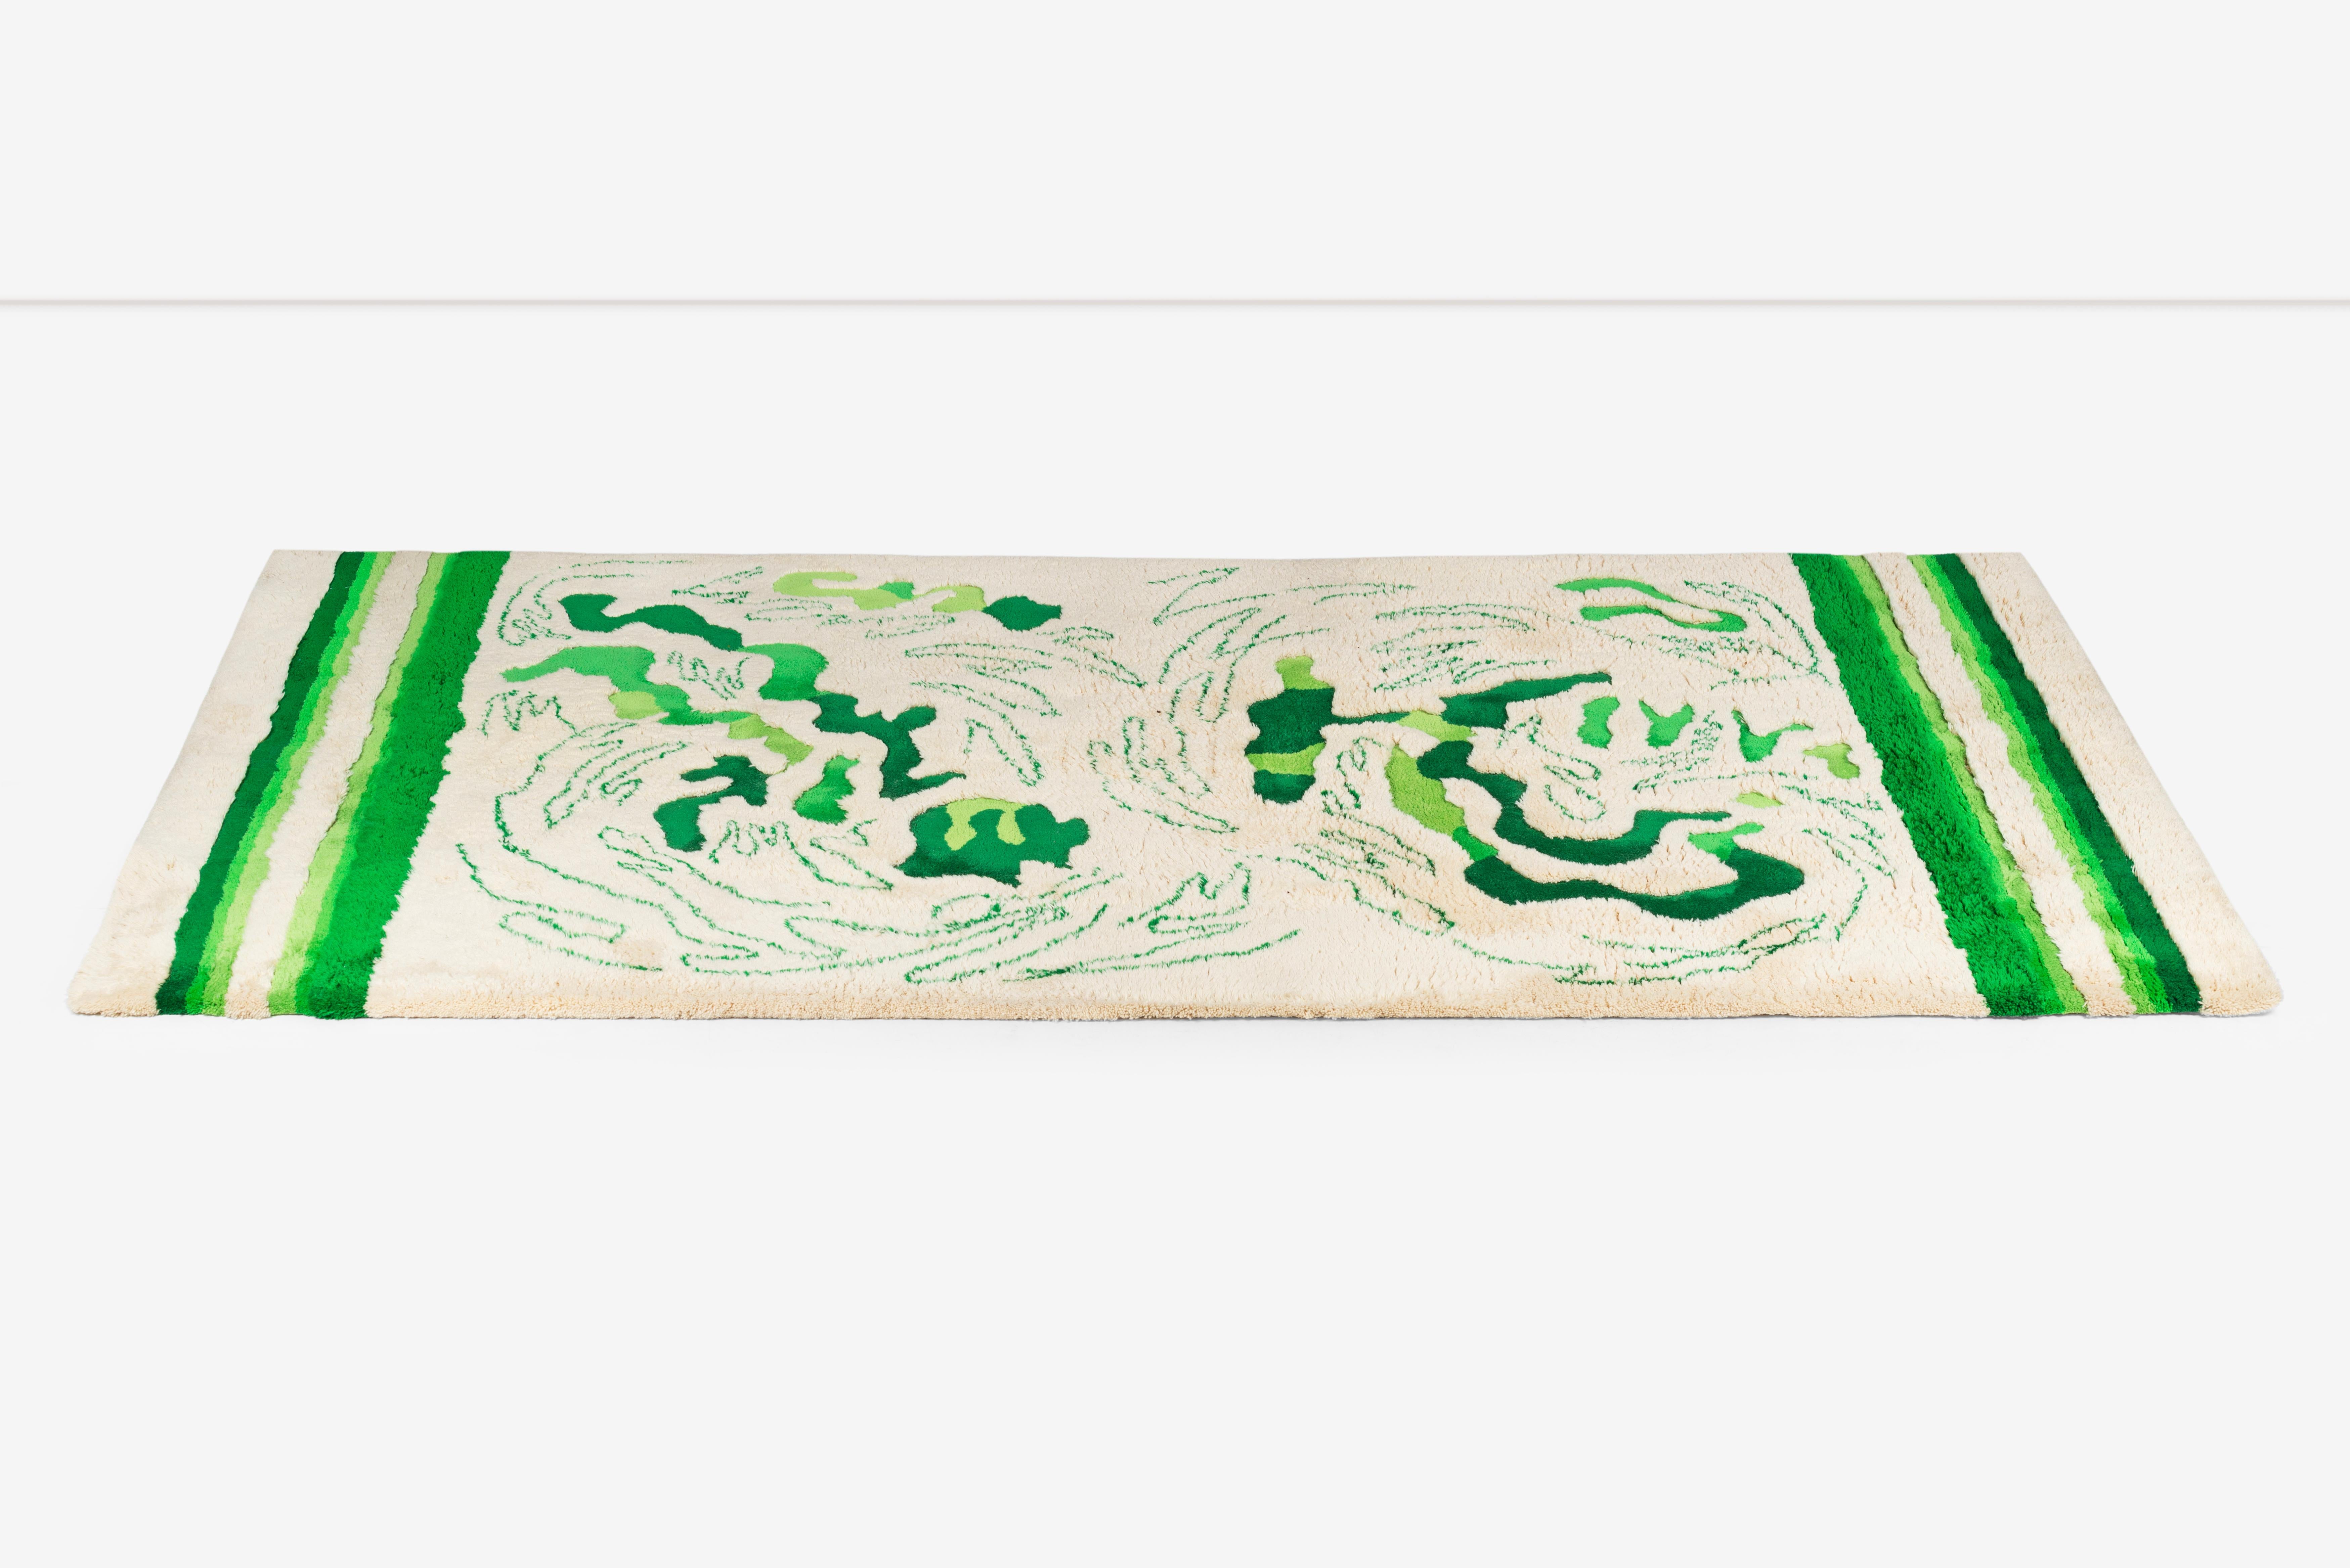 Edward fields rug with cream background and green camo like squiggles and abstract expressionisms.